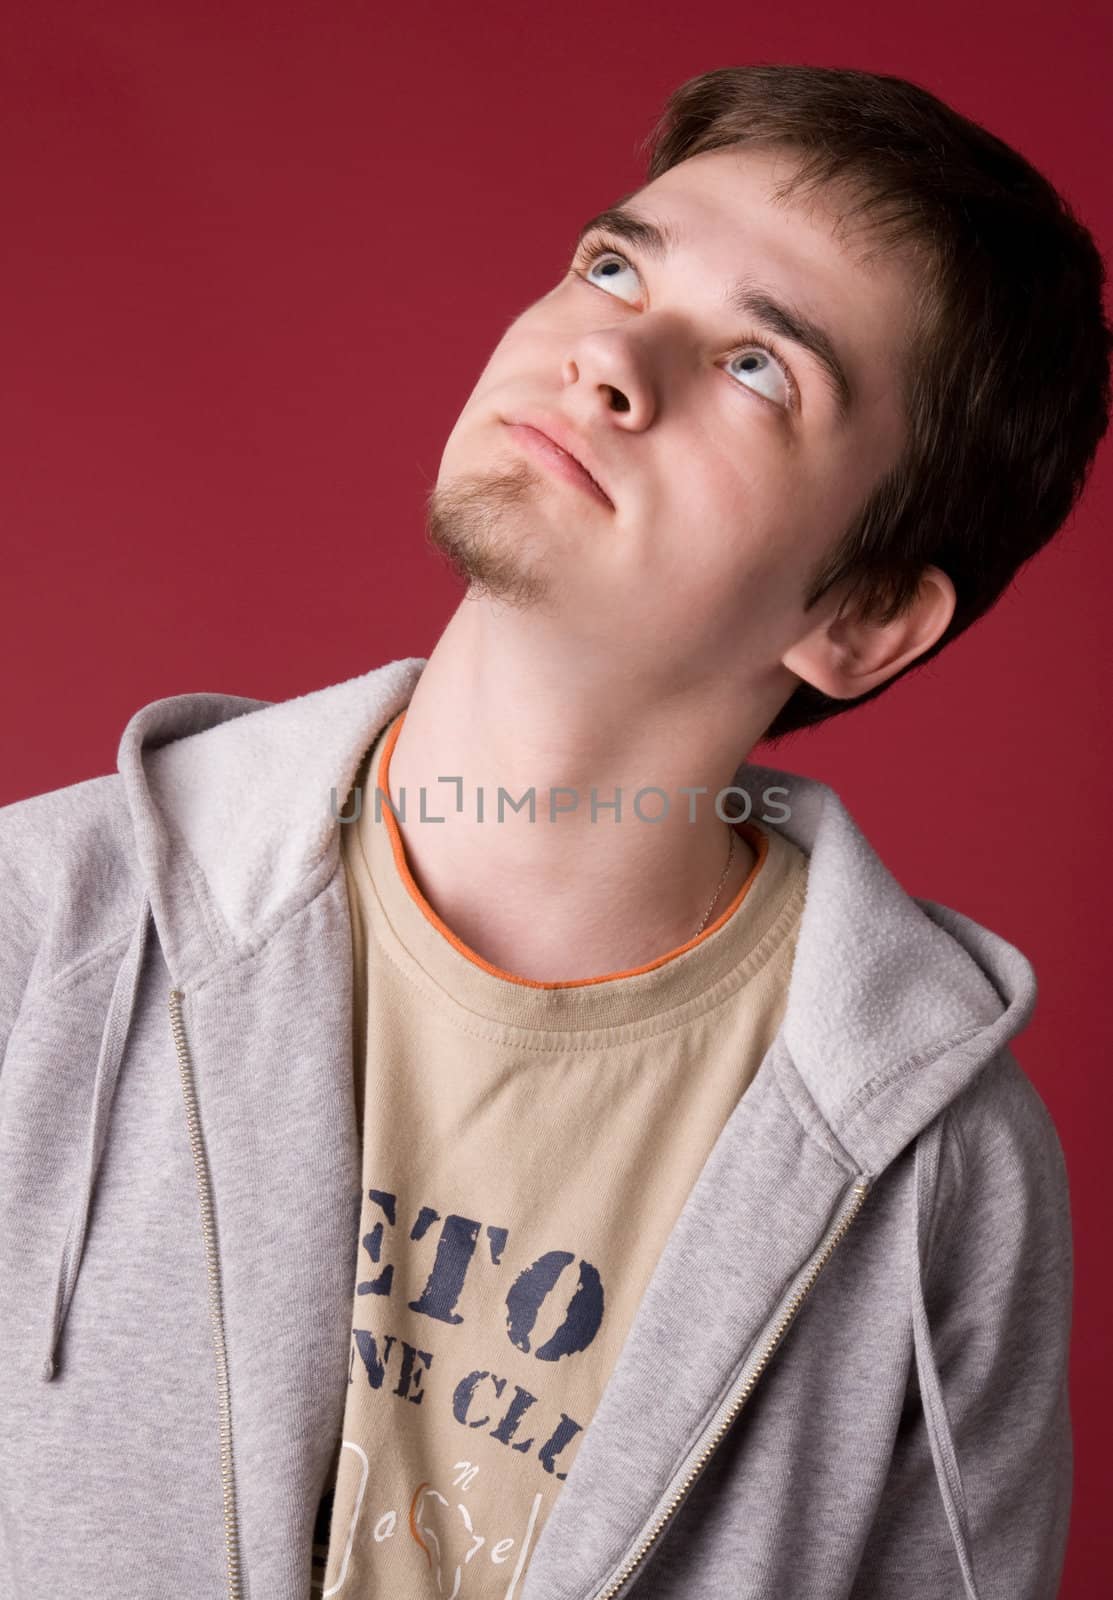 The young guy in studio on a red background